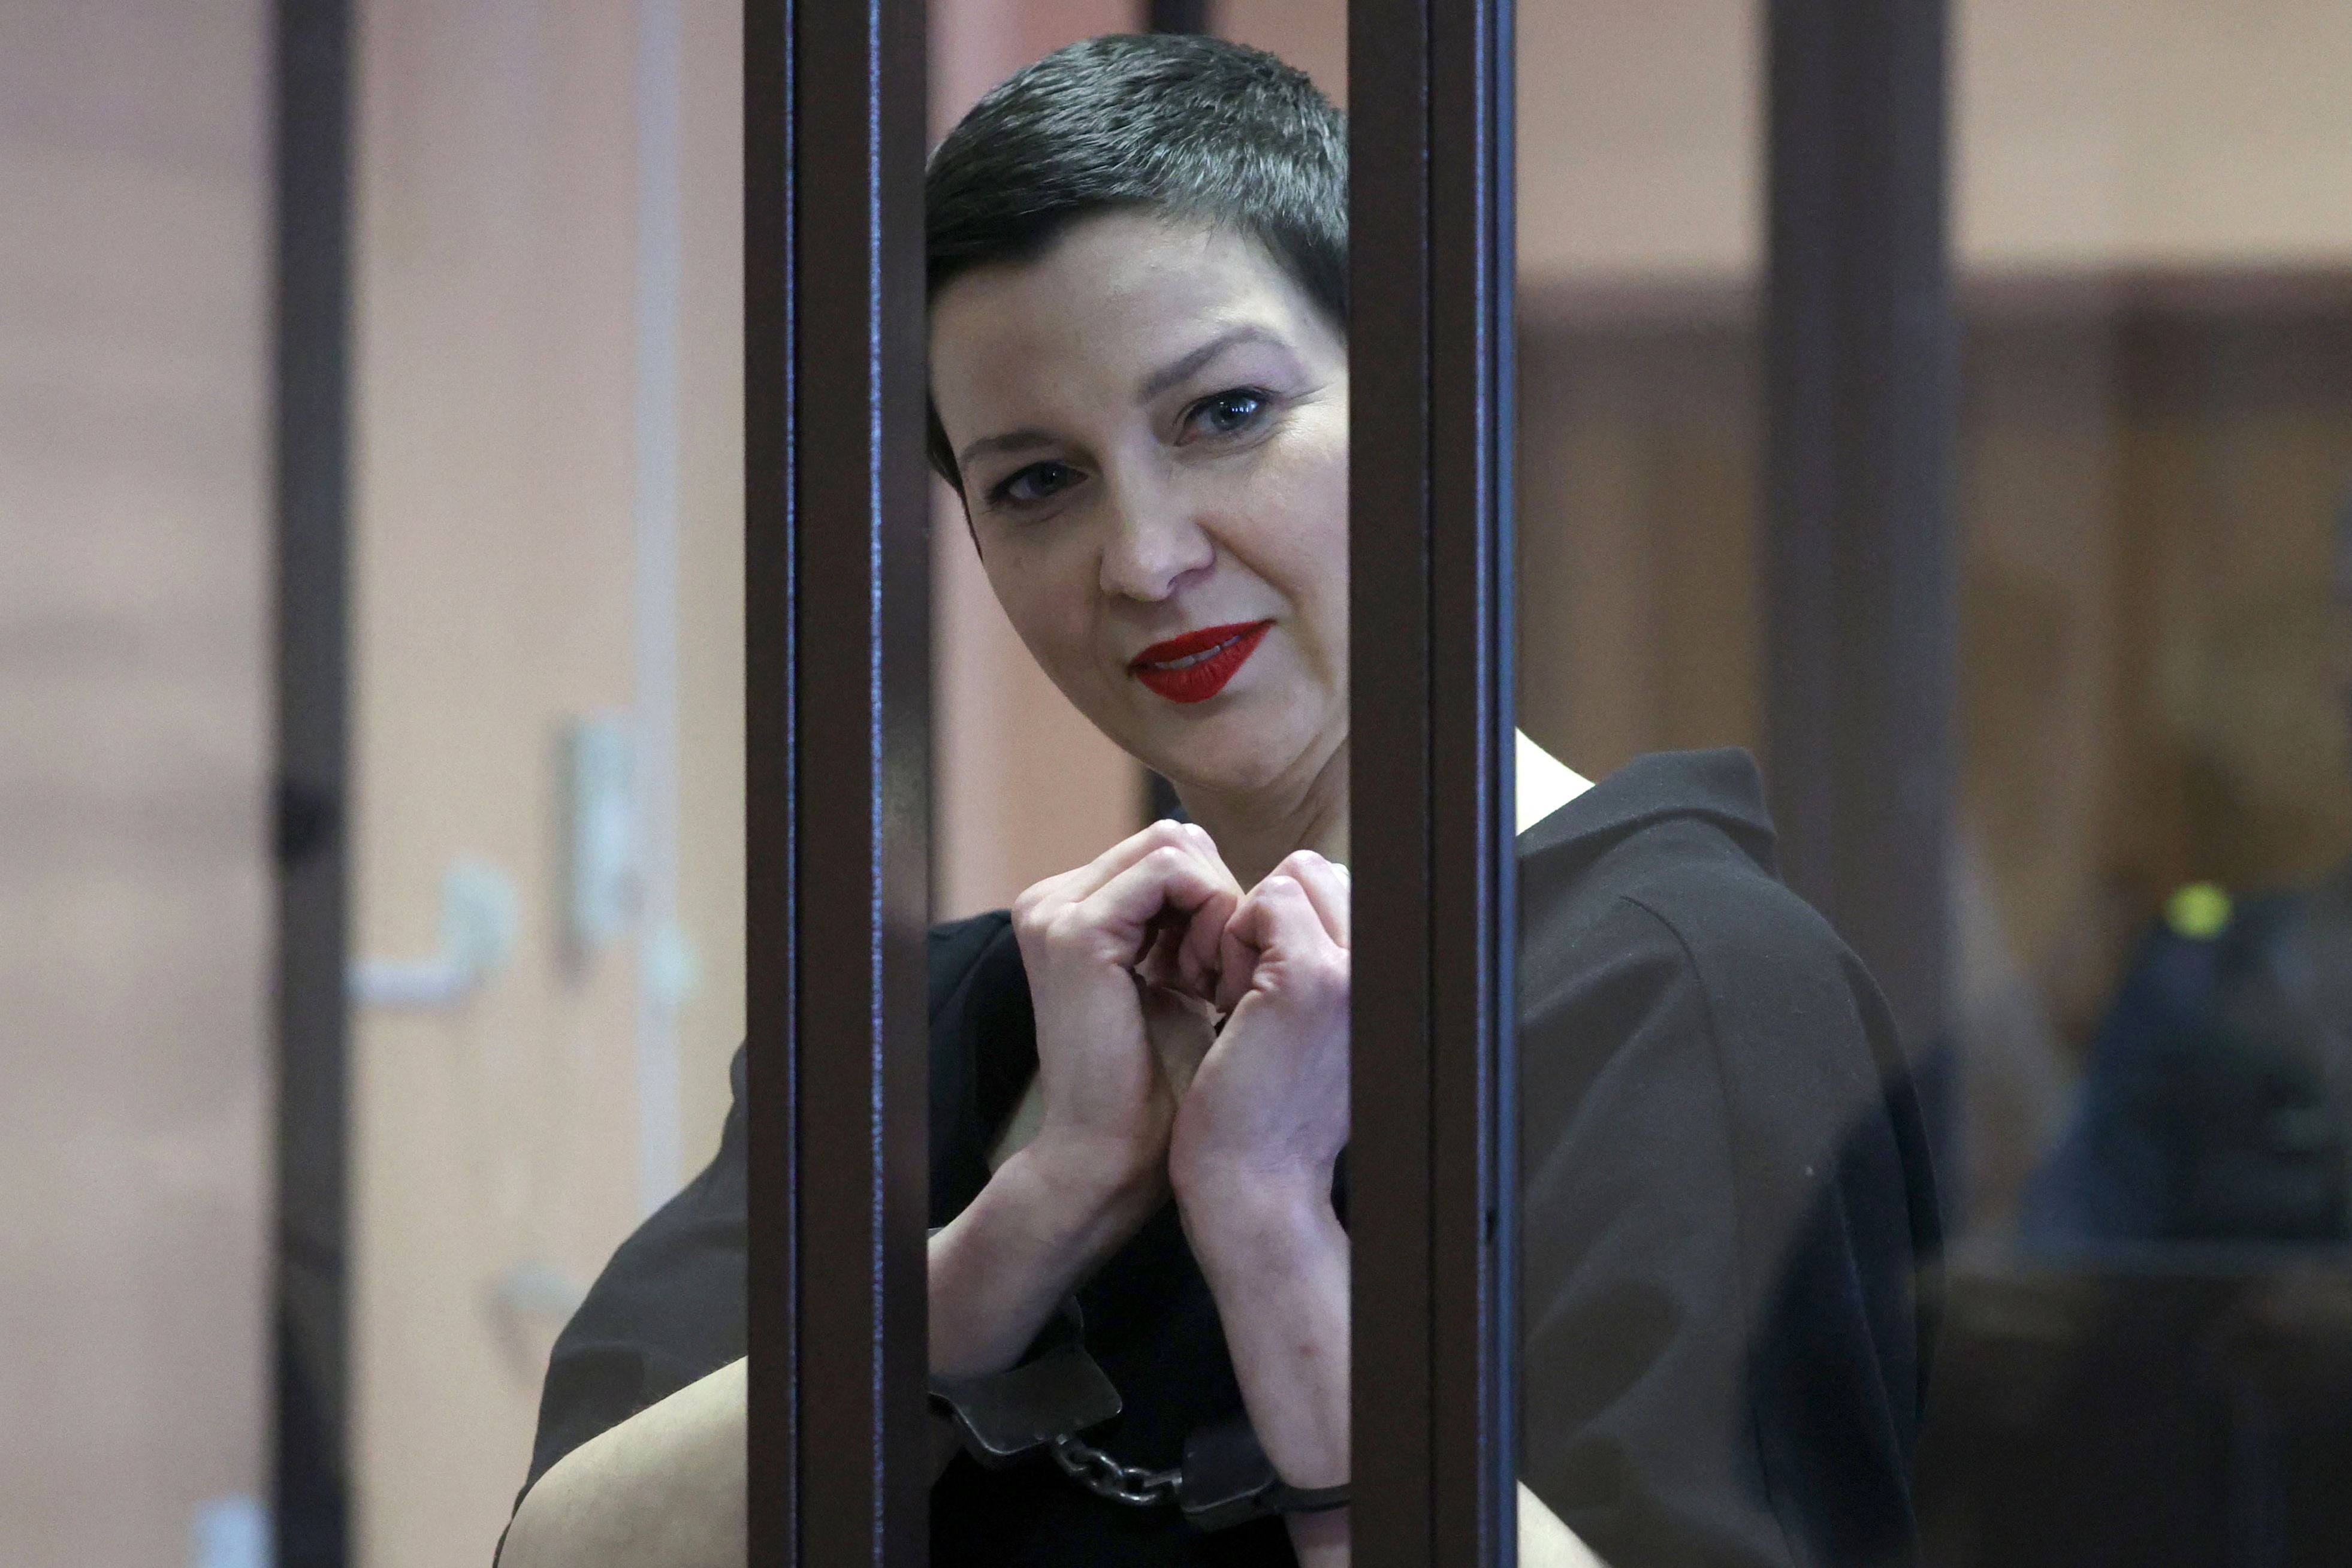 Maria Kolesnikova was sentenced to 11 years in prison for role in protests against Lukashenko (file photo)